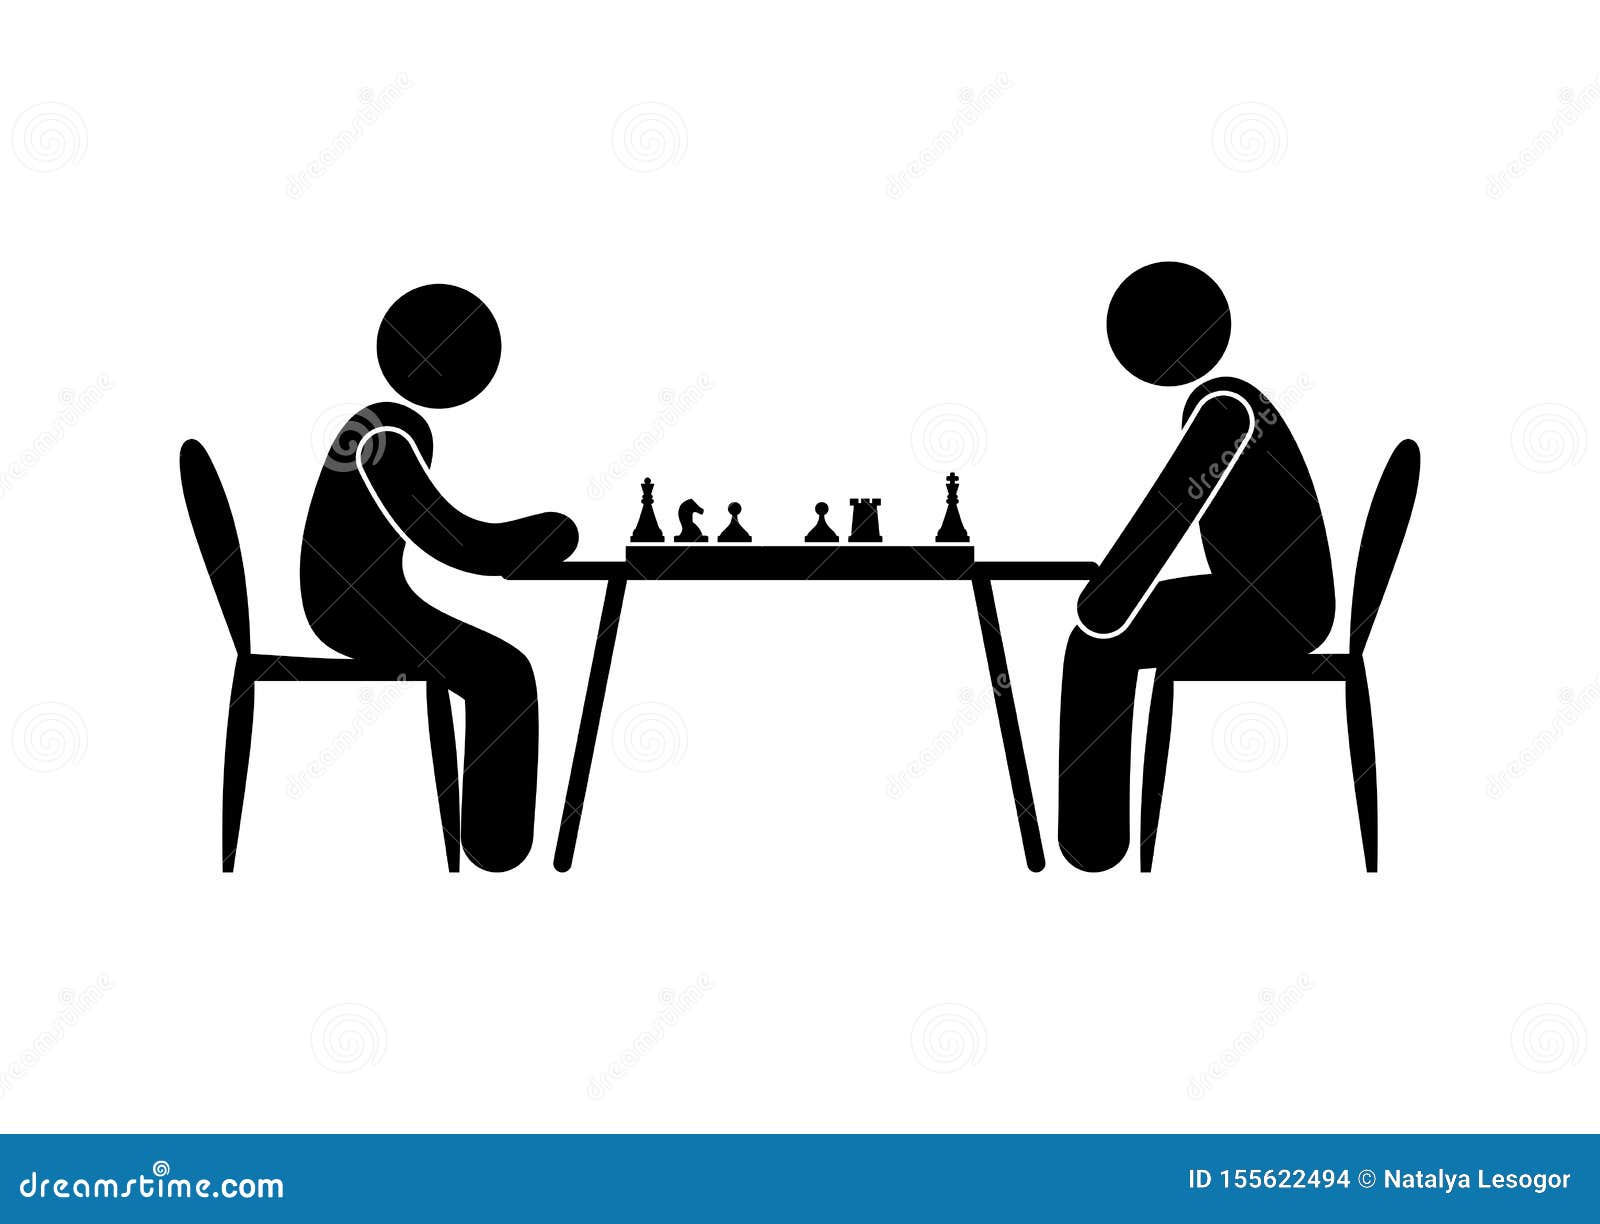 Chess players icon, chess duel illustration, stick figure man pictogram isolated